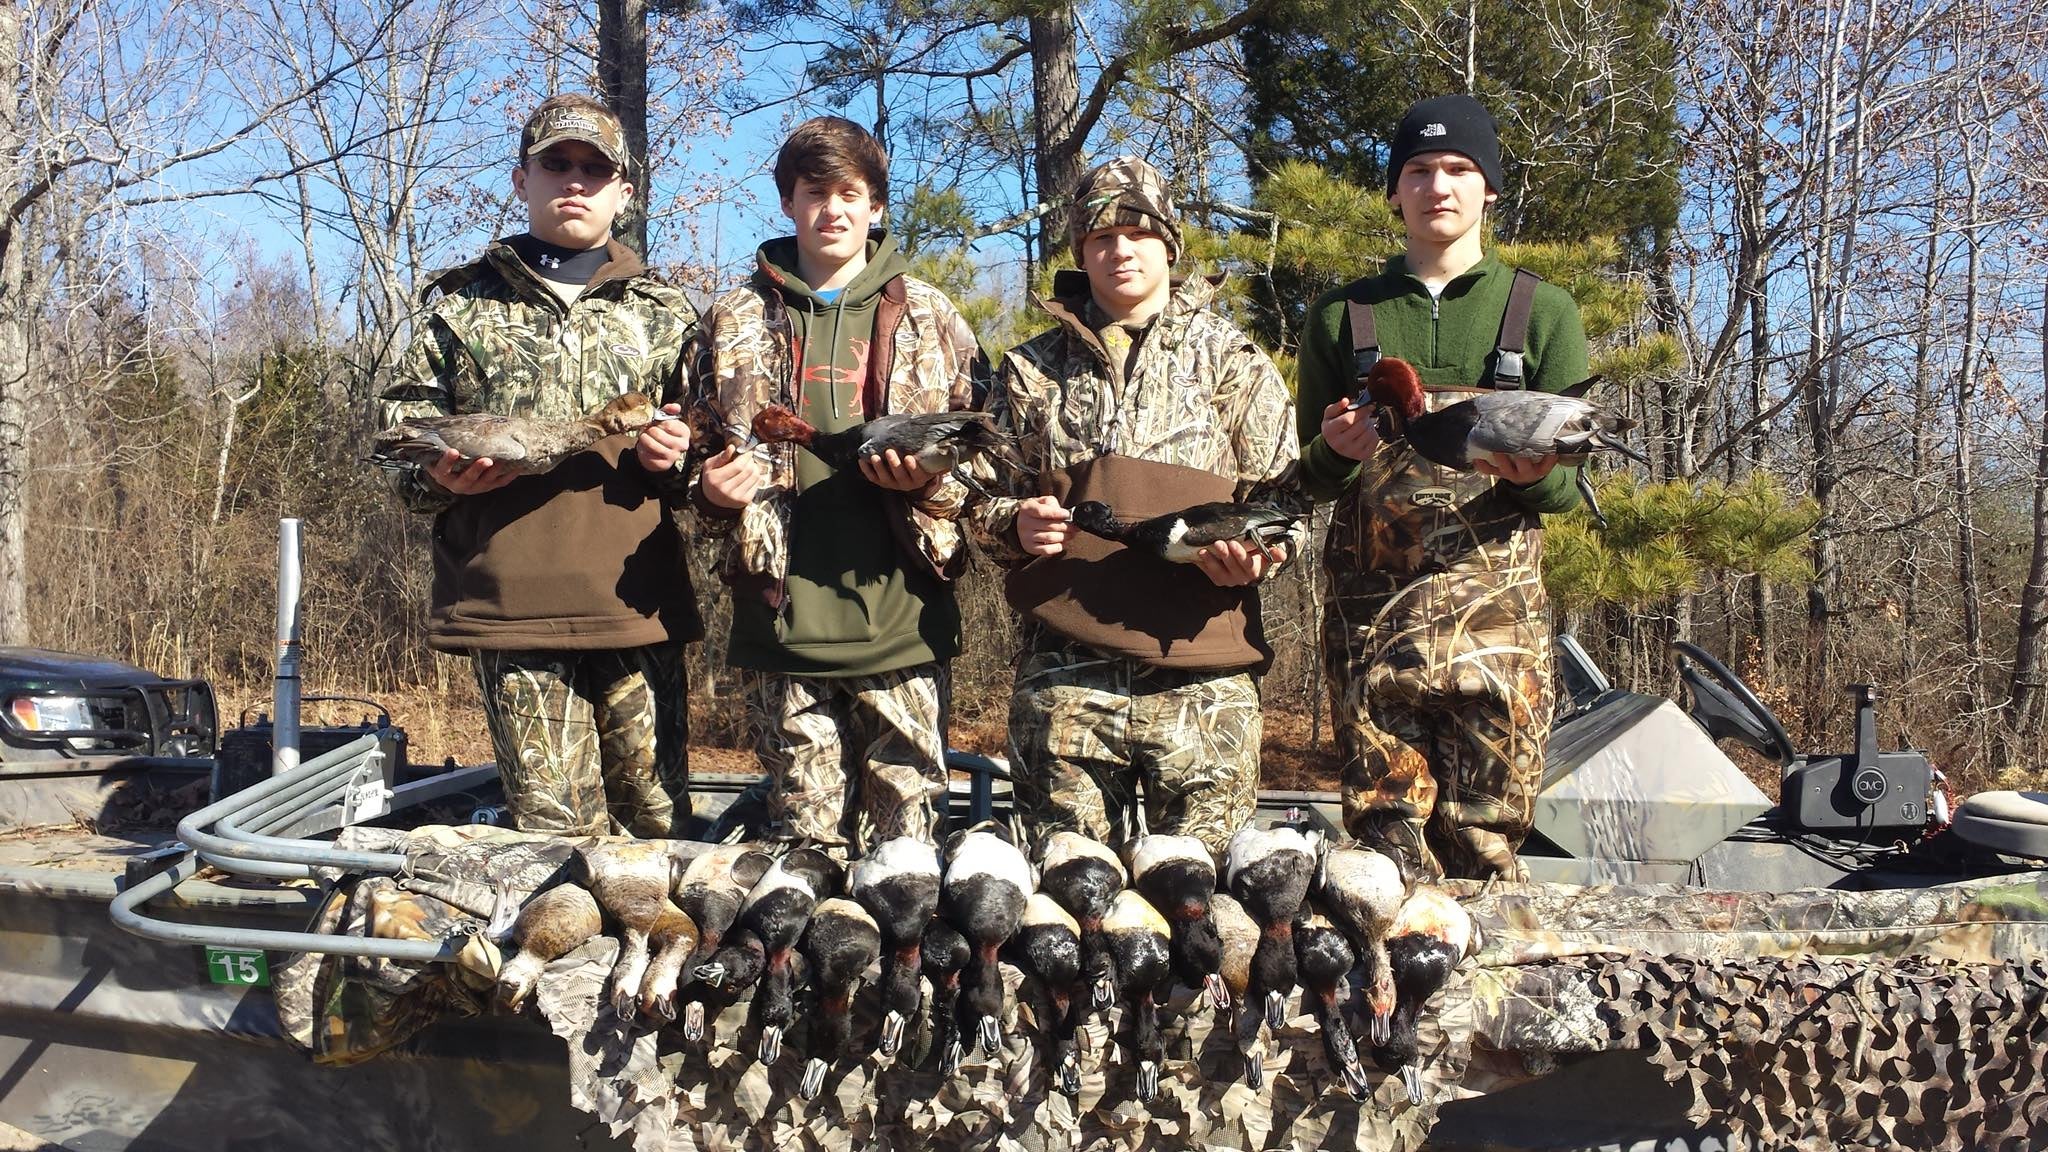 The Alabama Division of Wildlife and Freshwater Fisheries (WFF) has designated Saturday, November 17, 2018, as one of the 2018-19 hunting season’s Special Youth Waterfowl Hunting Days. On that day, youth under age 16 may hunt for waterfowl statewide when accompanied by a licensed adult hunter. Regular waterfowl season shooting hours, bag limits, legal arms and ammunitions apply to the special days. Hunting area rules and regulations also apply.